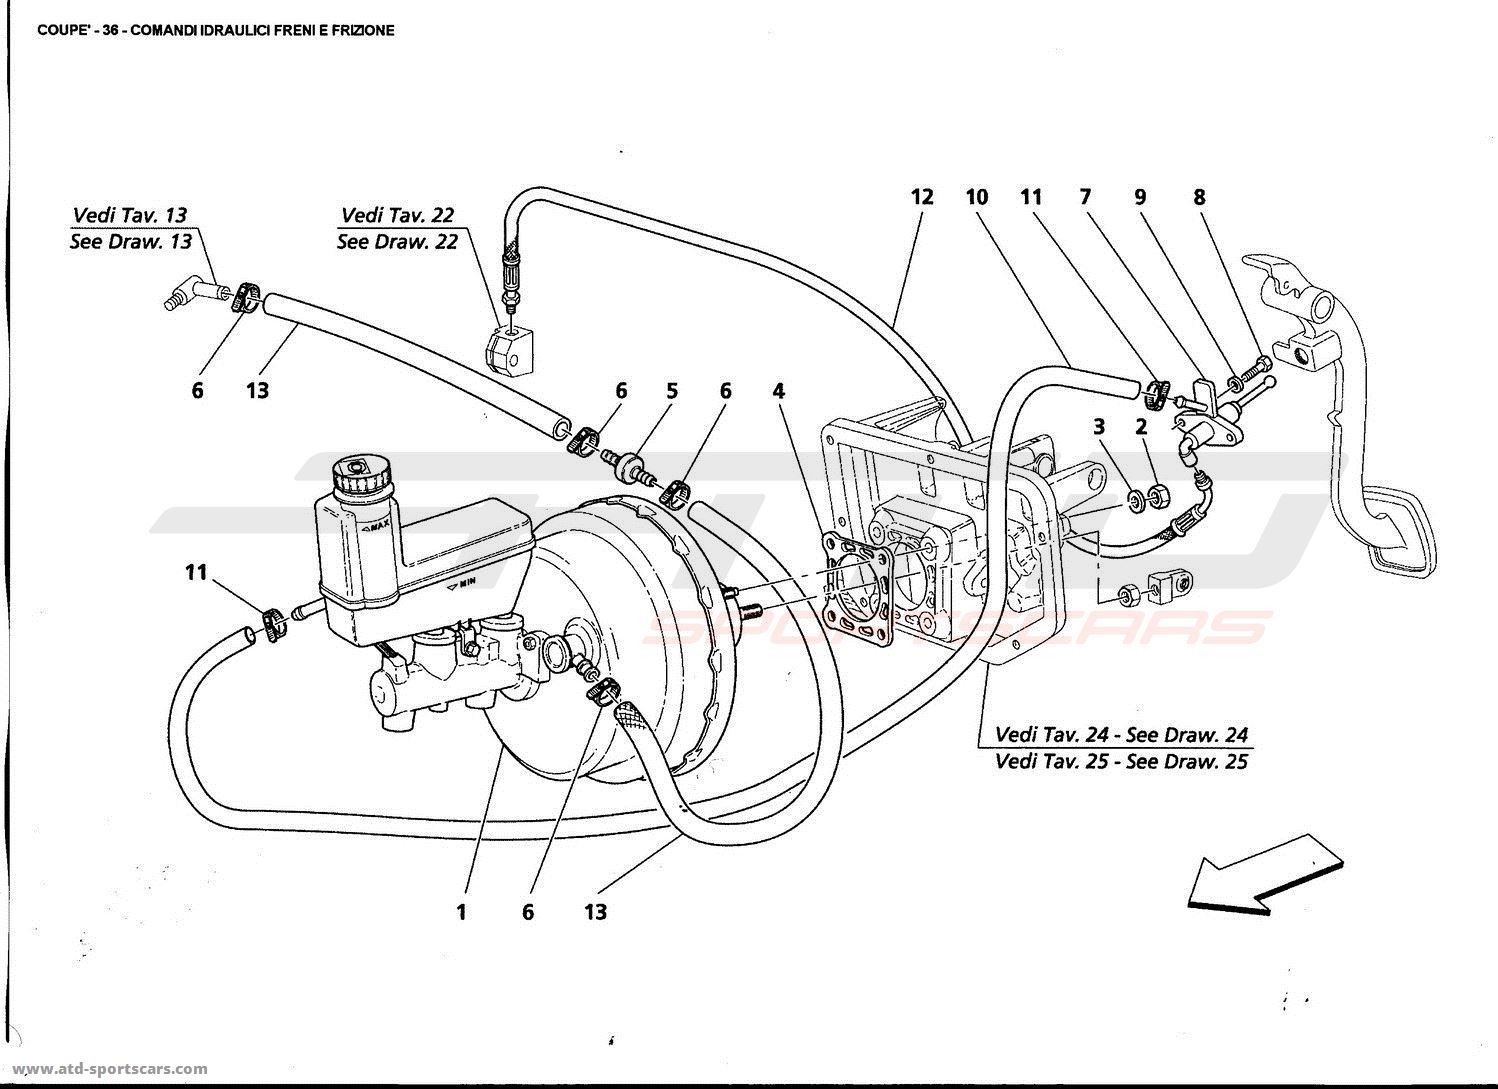 BRAKES AND CLUTCH HYDRAULIC CONTROLS